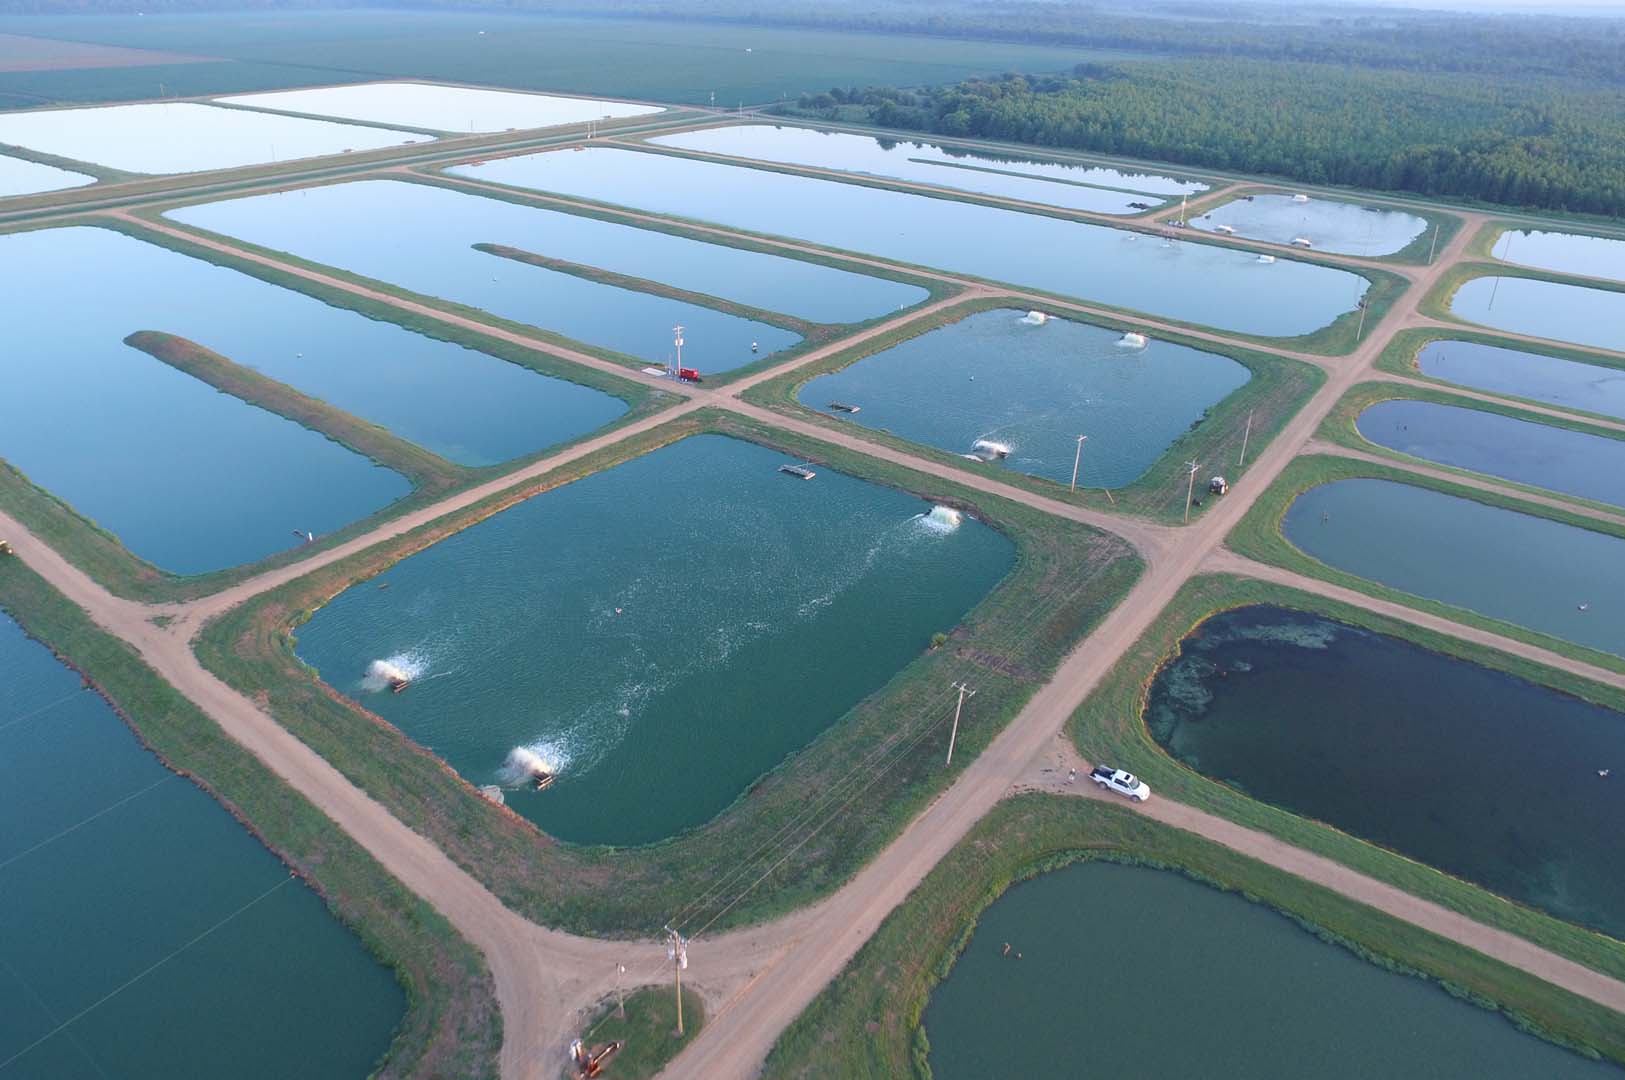 Split-pond technology compartmentalized traditional open ponds into a smaller fish-rearing basin occupying about 20 percent of the pond and a larger waste-treatment basin occupying the remaining 80 percent.